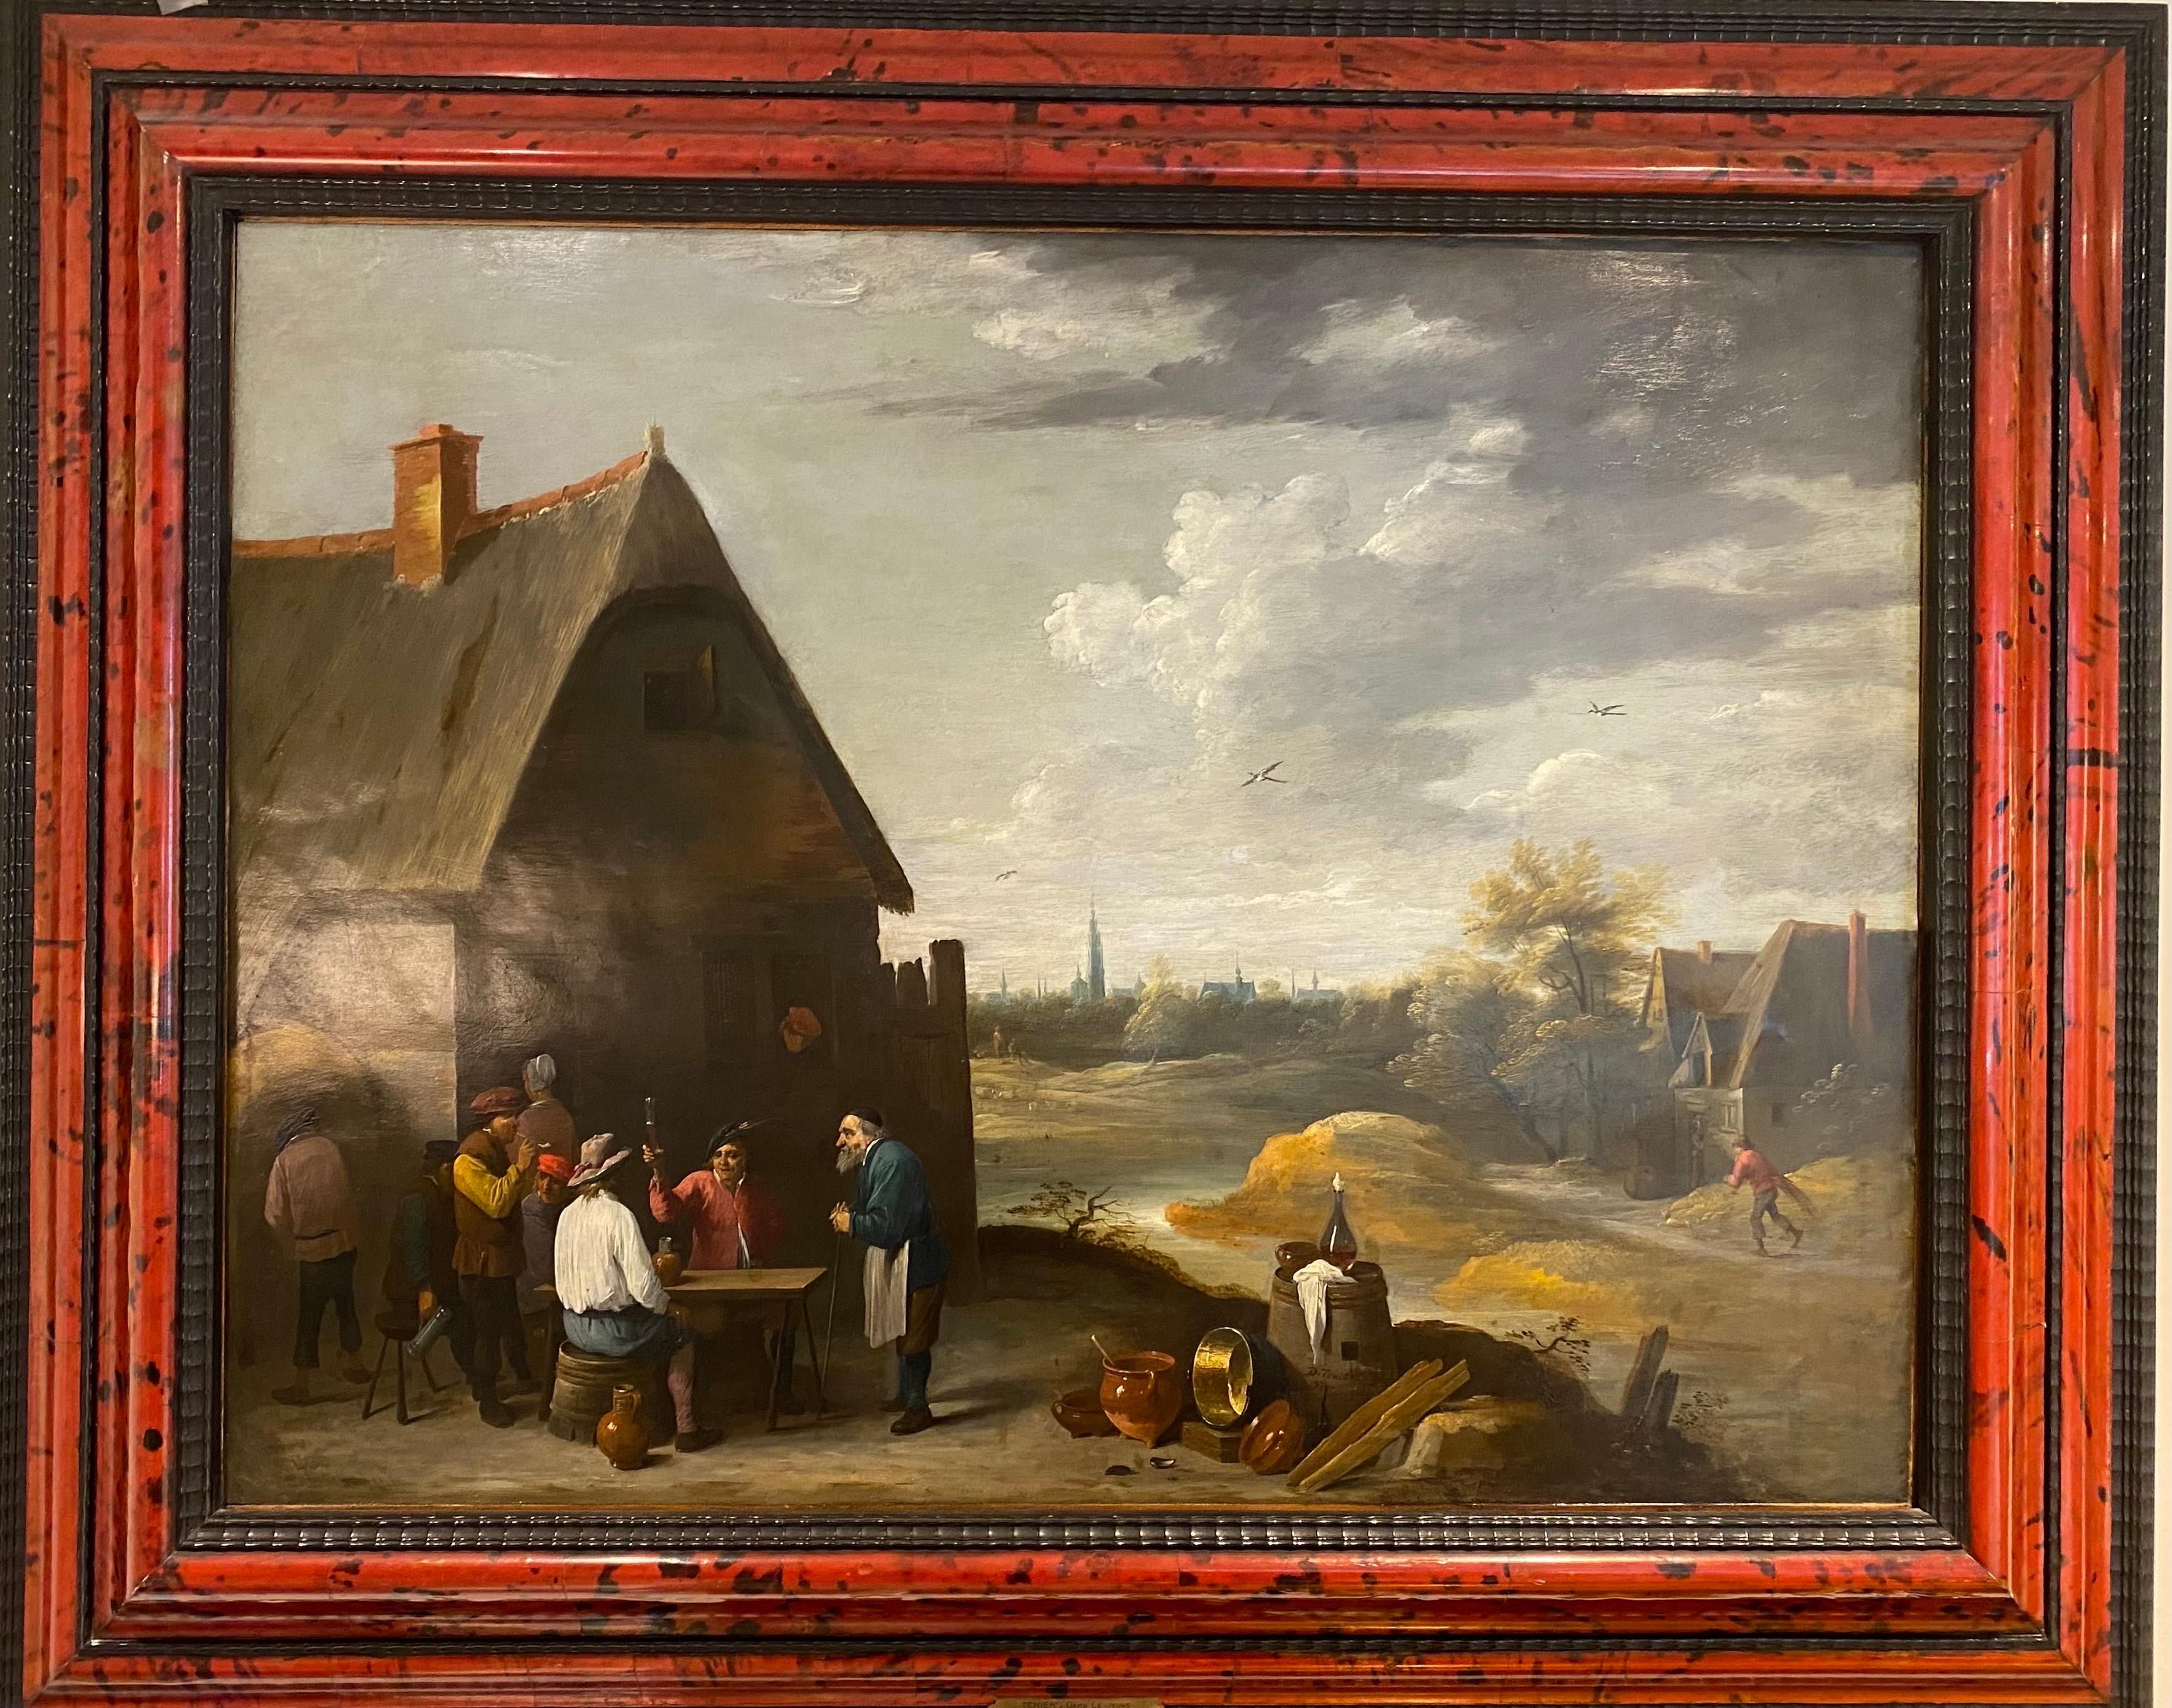 Abraham Teniers Figurative Painting - 17 century.
Oil on copper.
